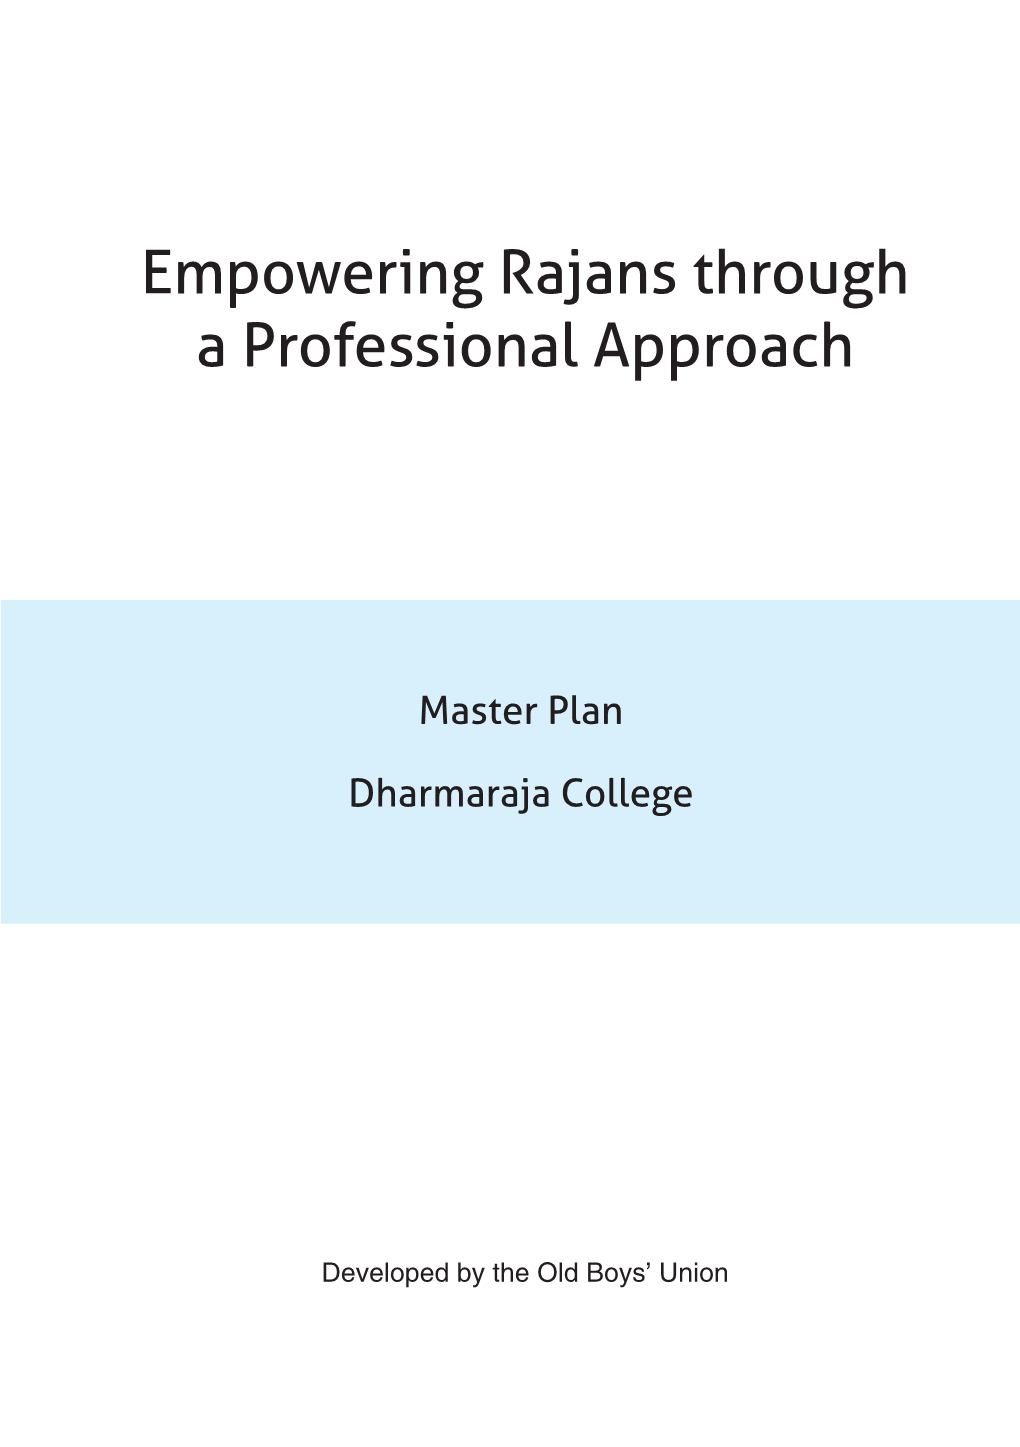 Empowering Rajans Through a Professional Approach